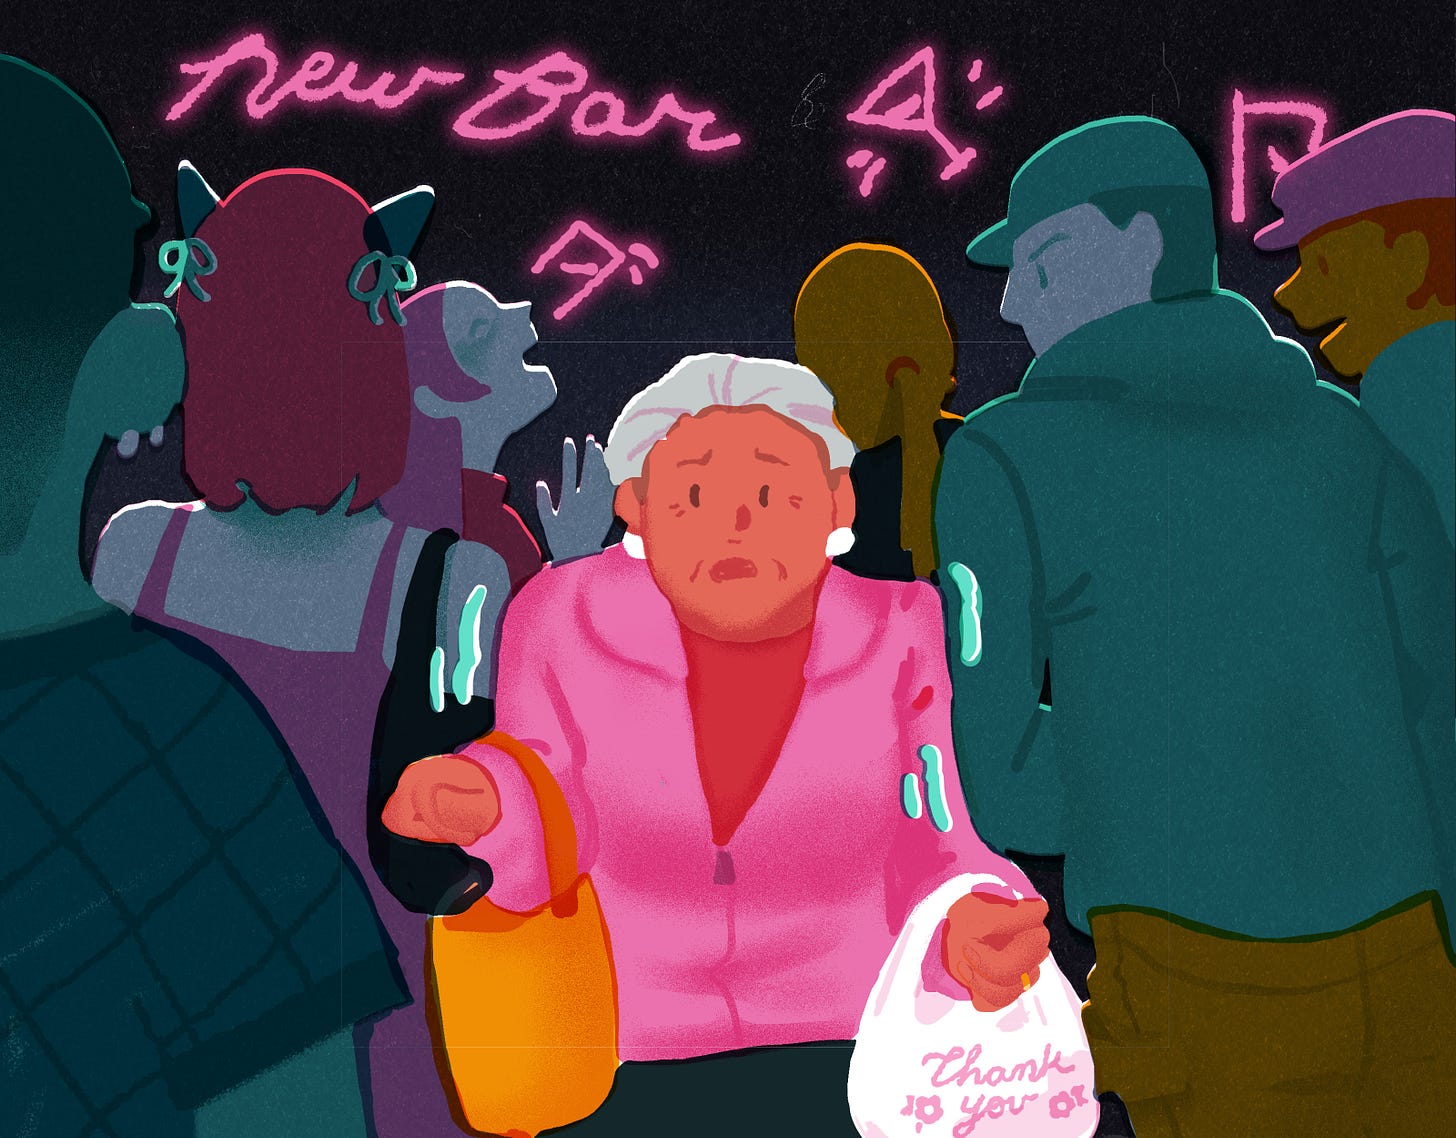 An older Latina woman carrying grocery bags looks anxious as she passes through a tight crowd of young trendy kids gathered under a neon sign that says “New Bar.” 